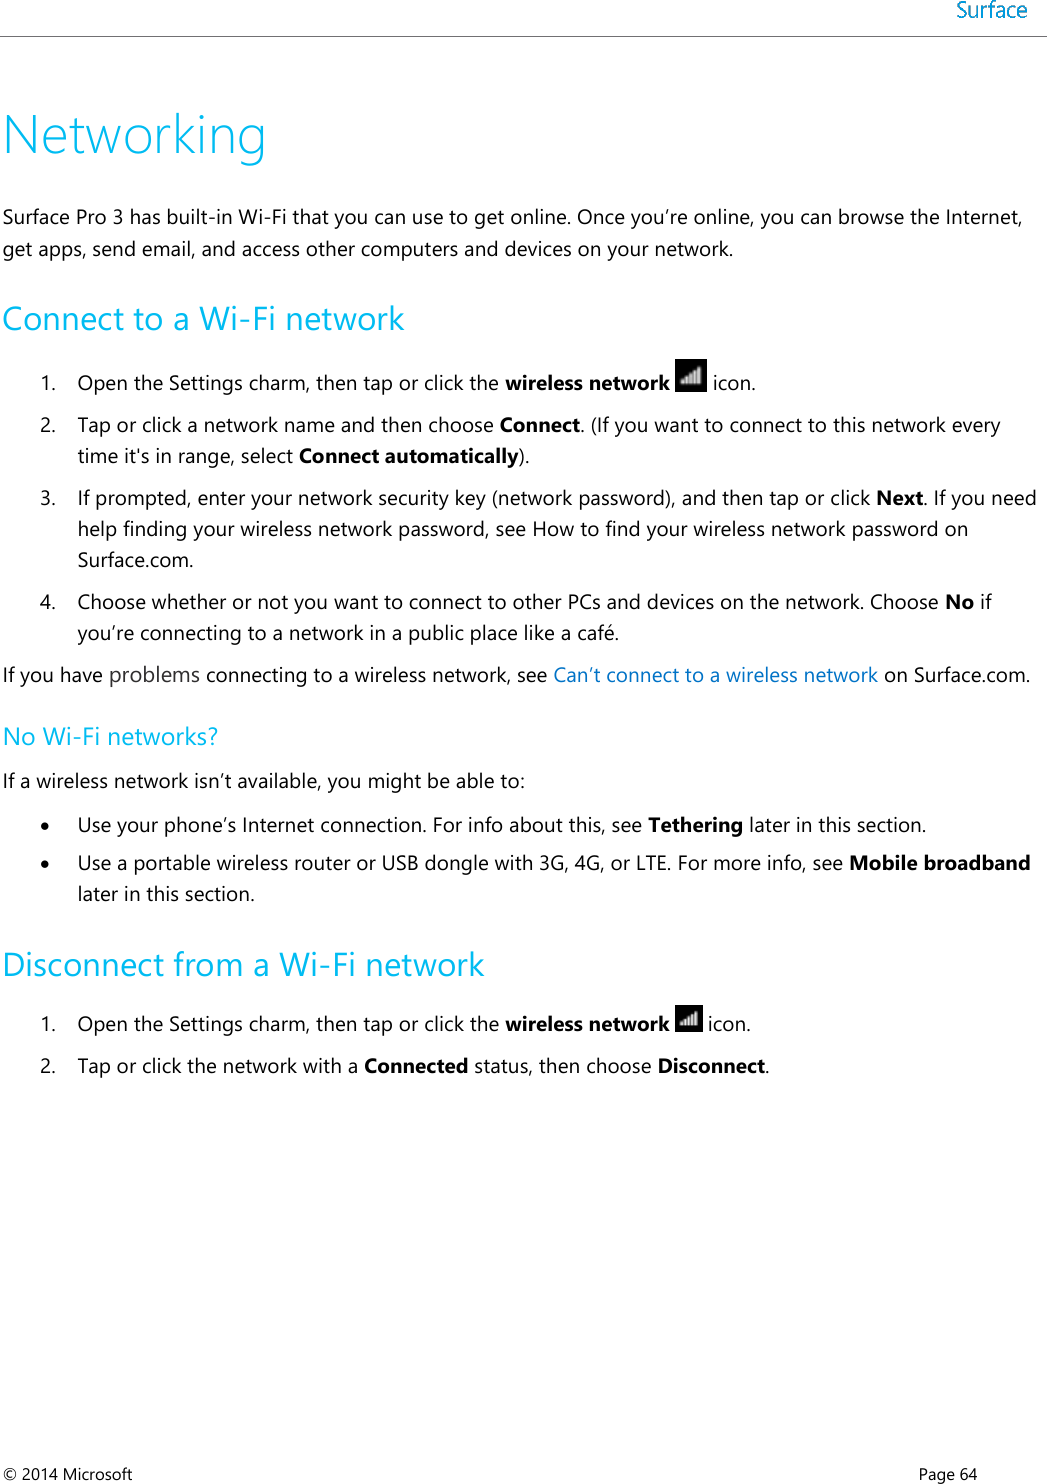  © 2014 Microsoft      Page 64  Networking Surface Pro 3 has built-in Wi-Fi that you can use to get online. Once you’re online, you can browse the Internet, get apps, send email, and access other computers and devices on your network. Connect to a Wi-Fi network 1. Open the Settings charm, then tap or click the wireless network   icon.  2. Tap or click a network name and then choose Connect. (If you want to connect to this network every time it&apos;s in range, select Connect automatically).  3. If prompted, enter your network security key (network password), and then tap or click Next. If you need help finding your wireless network password, see How to find your wireless network password on Surface.com. 4. Choose whether or not you want to connect to other PCs and devices on the network. Choose No if you’re connecting to a network in a public place like a café. If you have problems connecting to a wireless network, see Can’t connect to a wireless network on Surface.com.   No Wi-Fi networks? If a wireless network isn’t available, you might be able to:  Use your phone’s Internet connection. For info about this, see Tethering later in this section.   Use a portable wireless router or USB dongle with 3G, 4G, or LTE. For more info, see Mobile broadband later in this section. Disconnect from a Wi-Fi network 1. Open the Settings charm, then tap or click the wireless network   icon. 2. Tap or click the network with a Connected status, then choose Disconnect. 